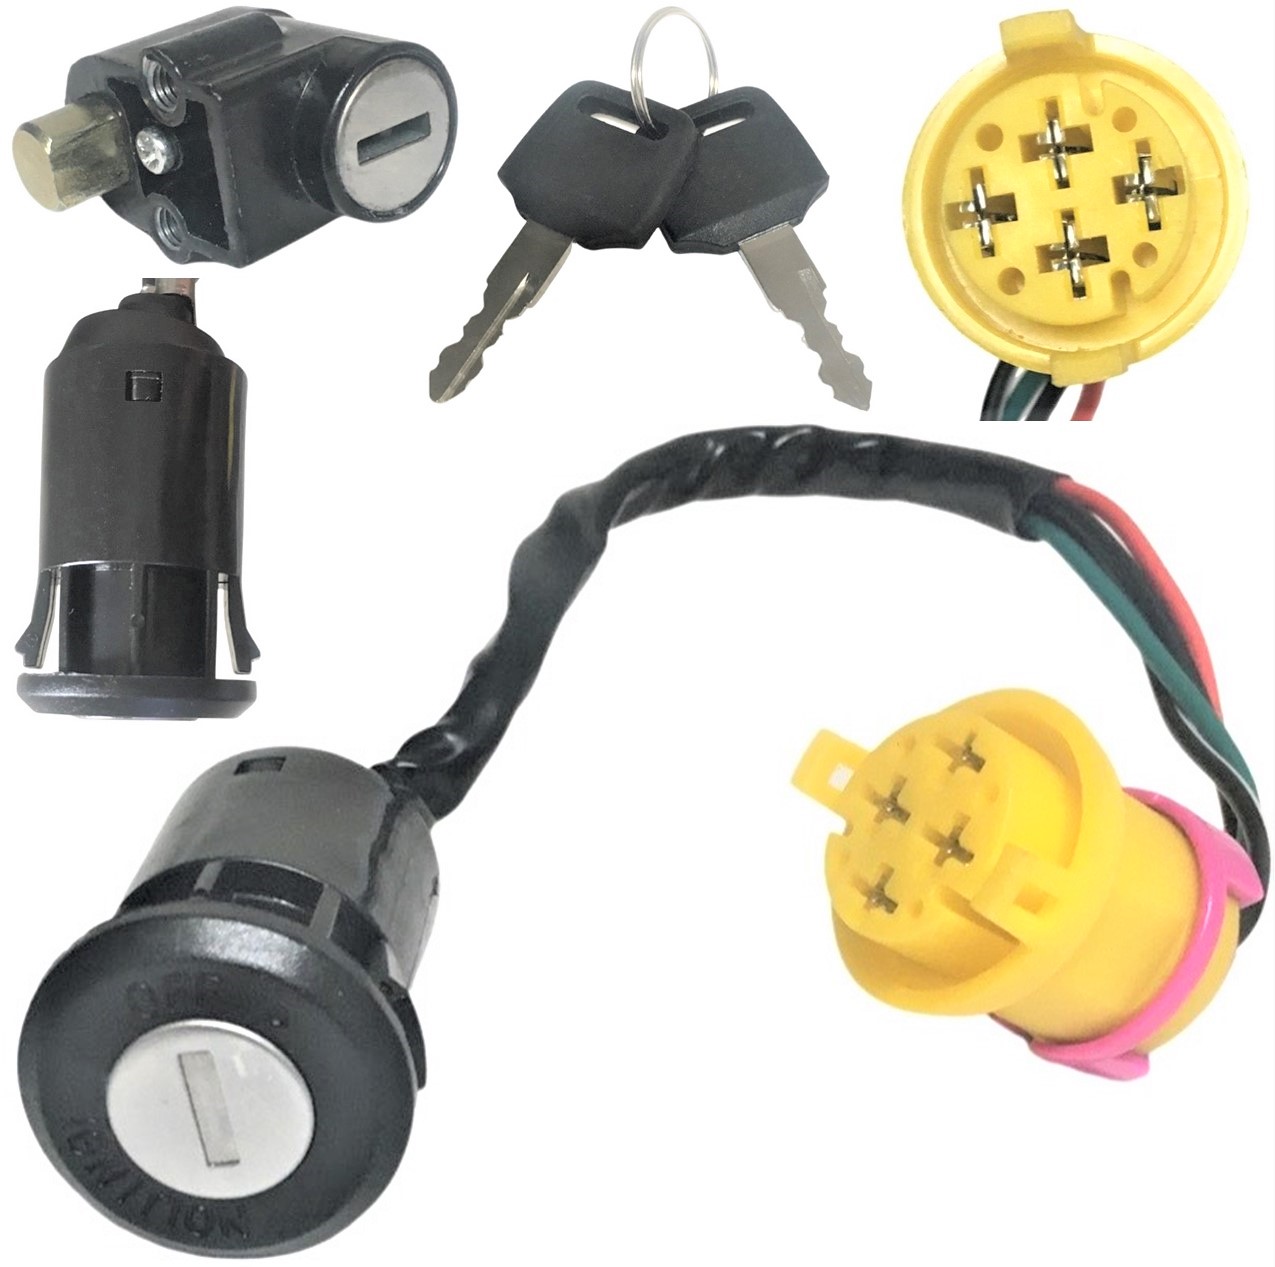 Ignition Switch Fits Many ATVs With Helmet Lock 4 Pin in 4 Pin Round Jack - Click Image to Close